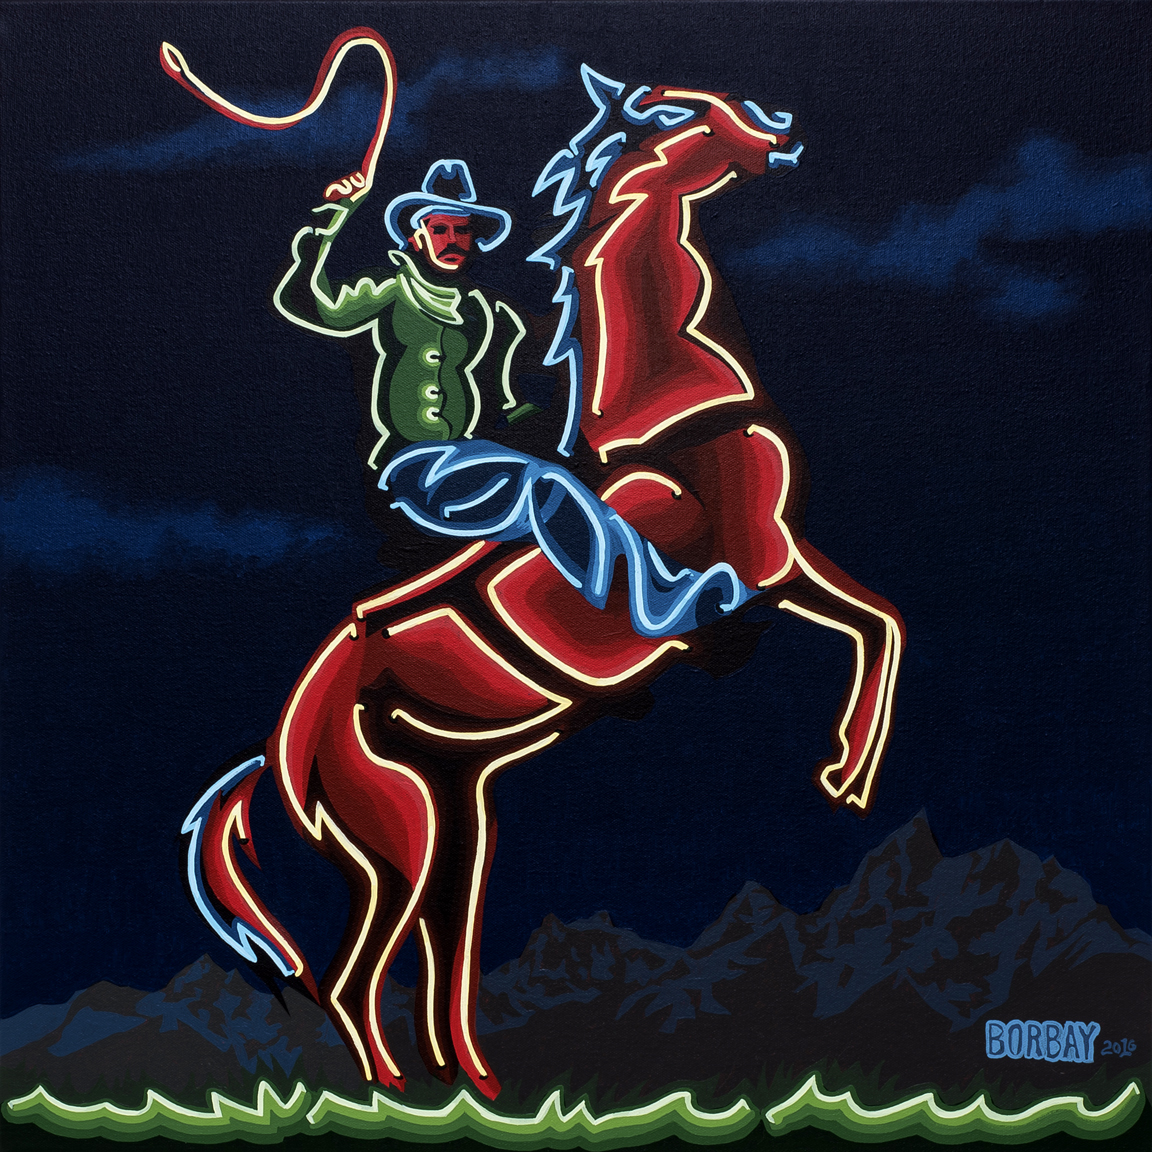 The Neon Cowboy Painting by Borbay